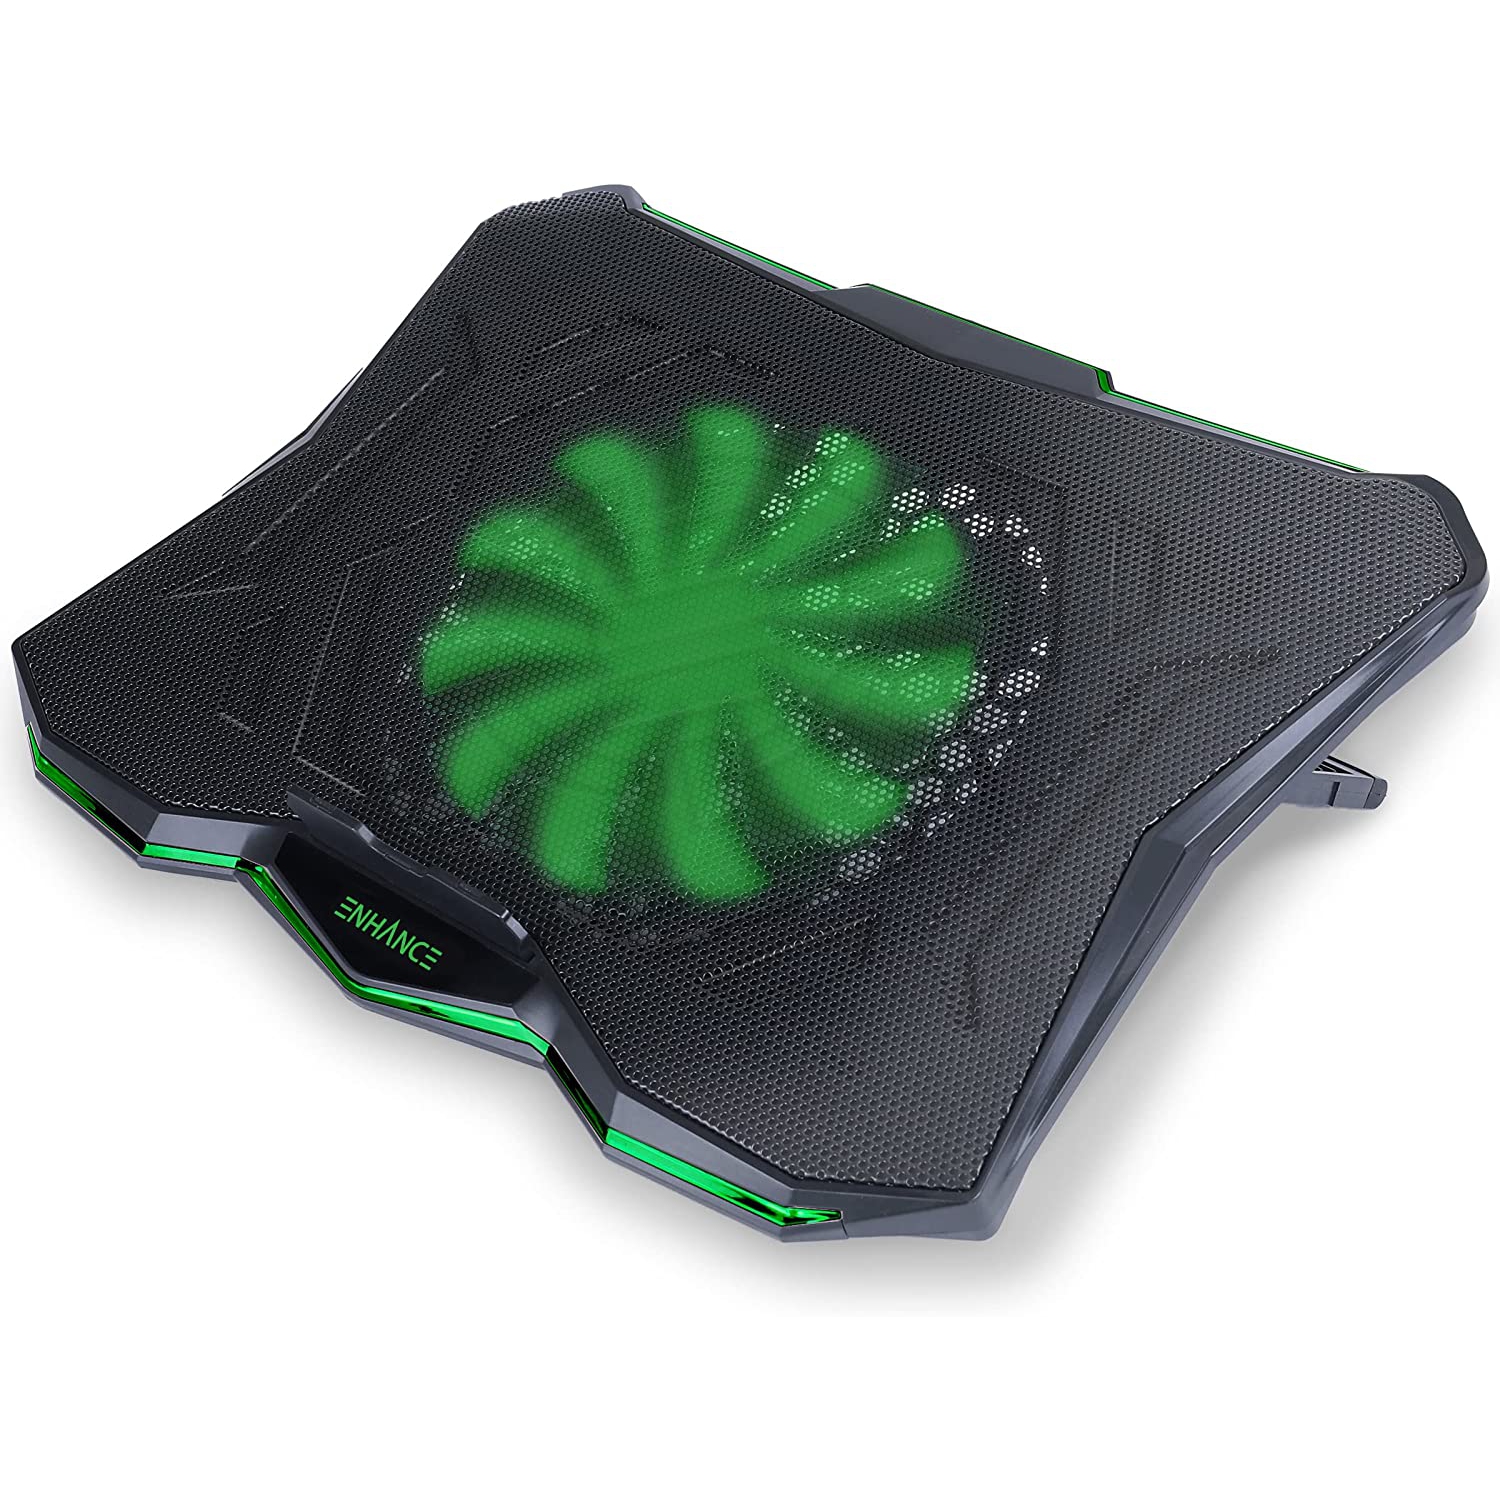 ENHANCE Cryogen 5 Gaming Laptop Cooling Pad Stand - Laptop Cooler with 7 Adjustable Height & Dual USB Ports for 17 inch Laptops - High Performance LED Laptop Fan 800 RPM - Green